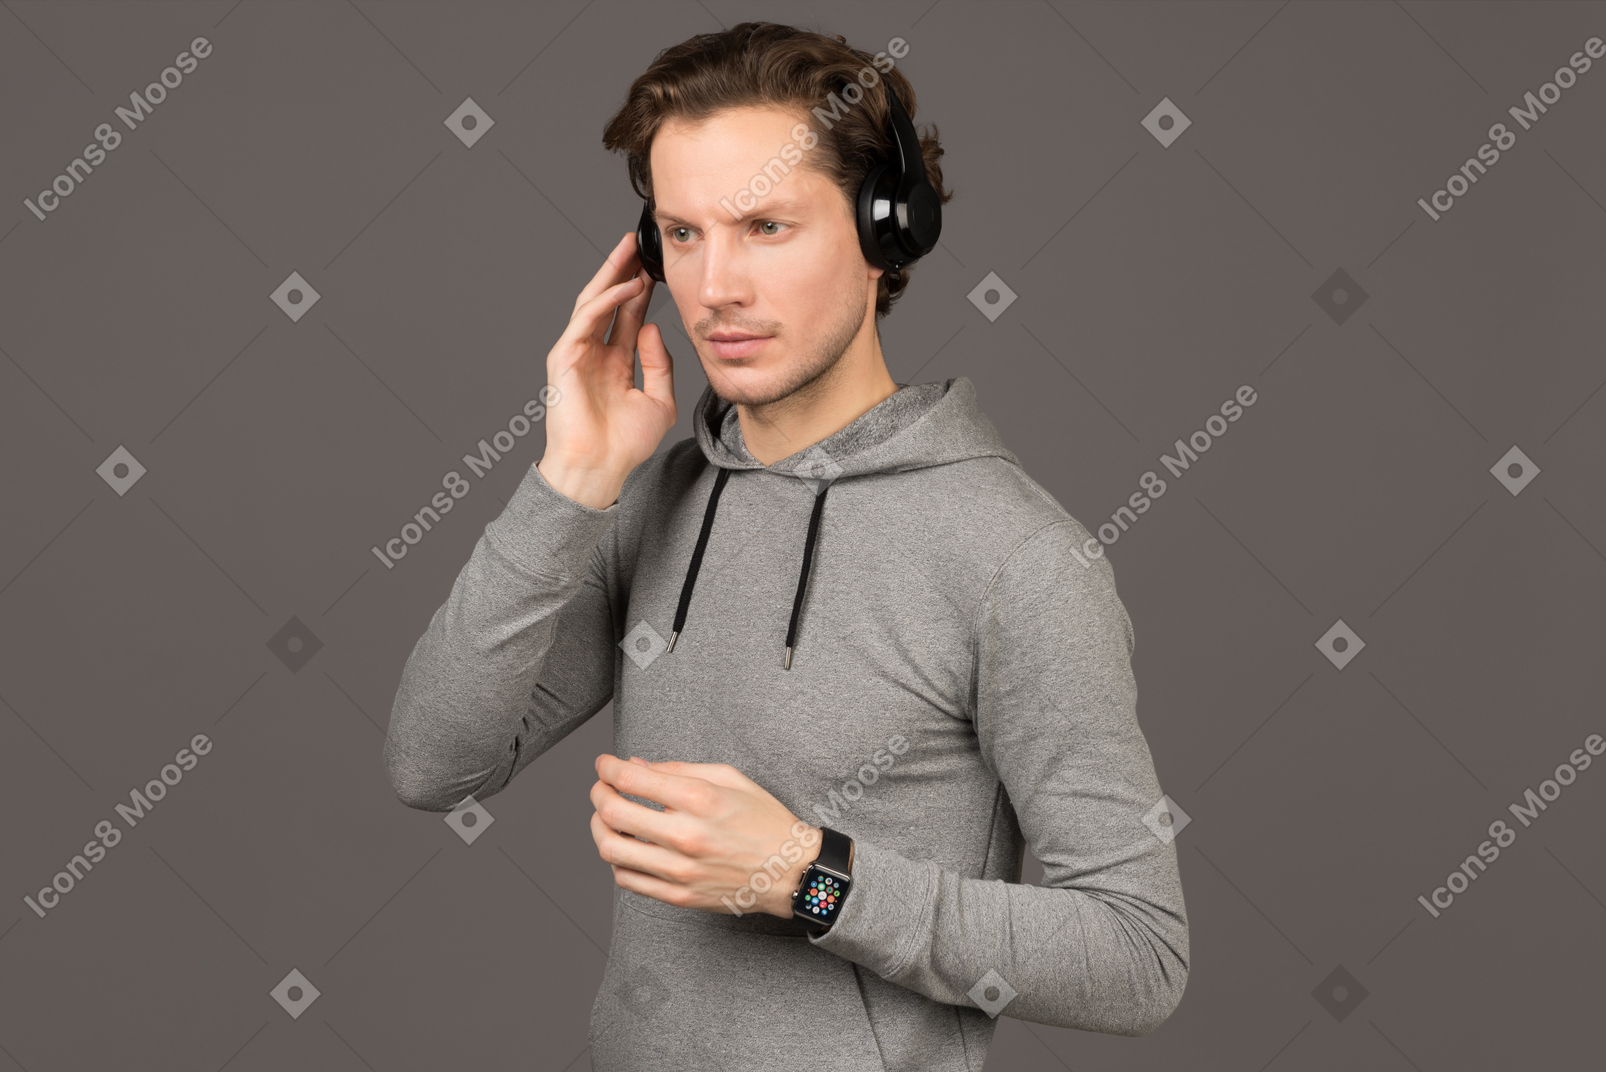 Choosing the best music for his morning run